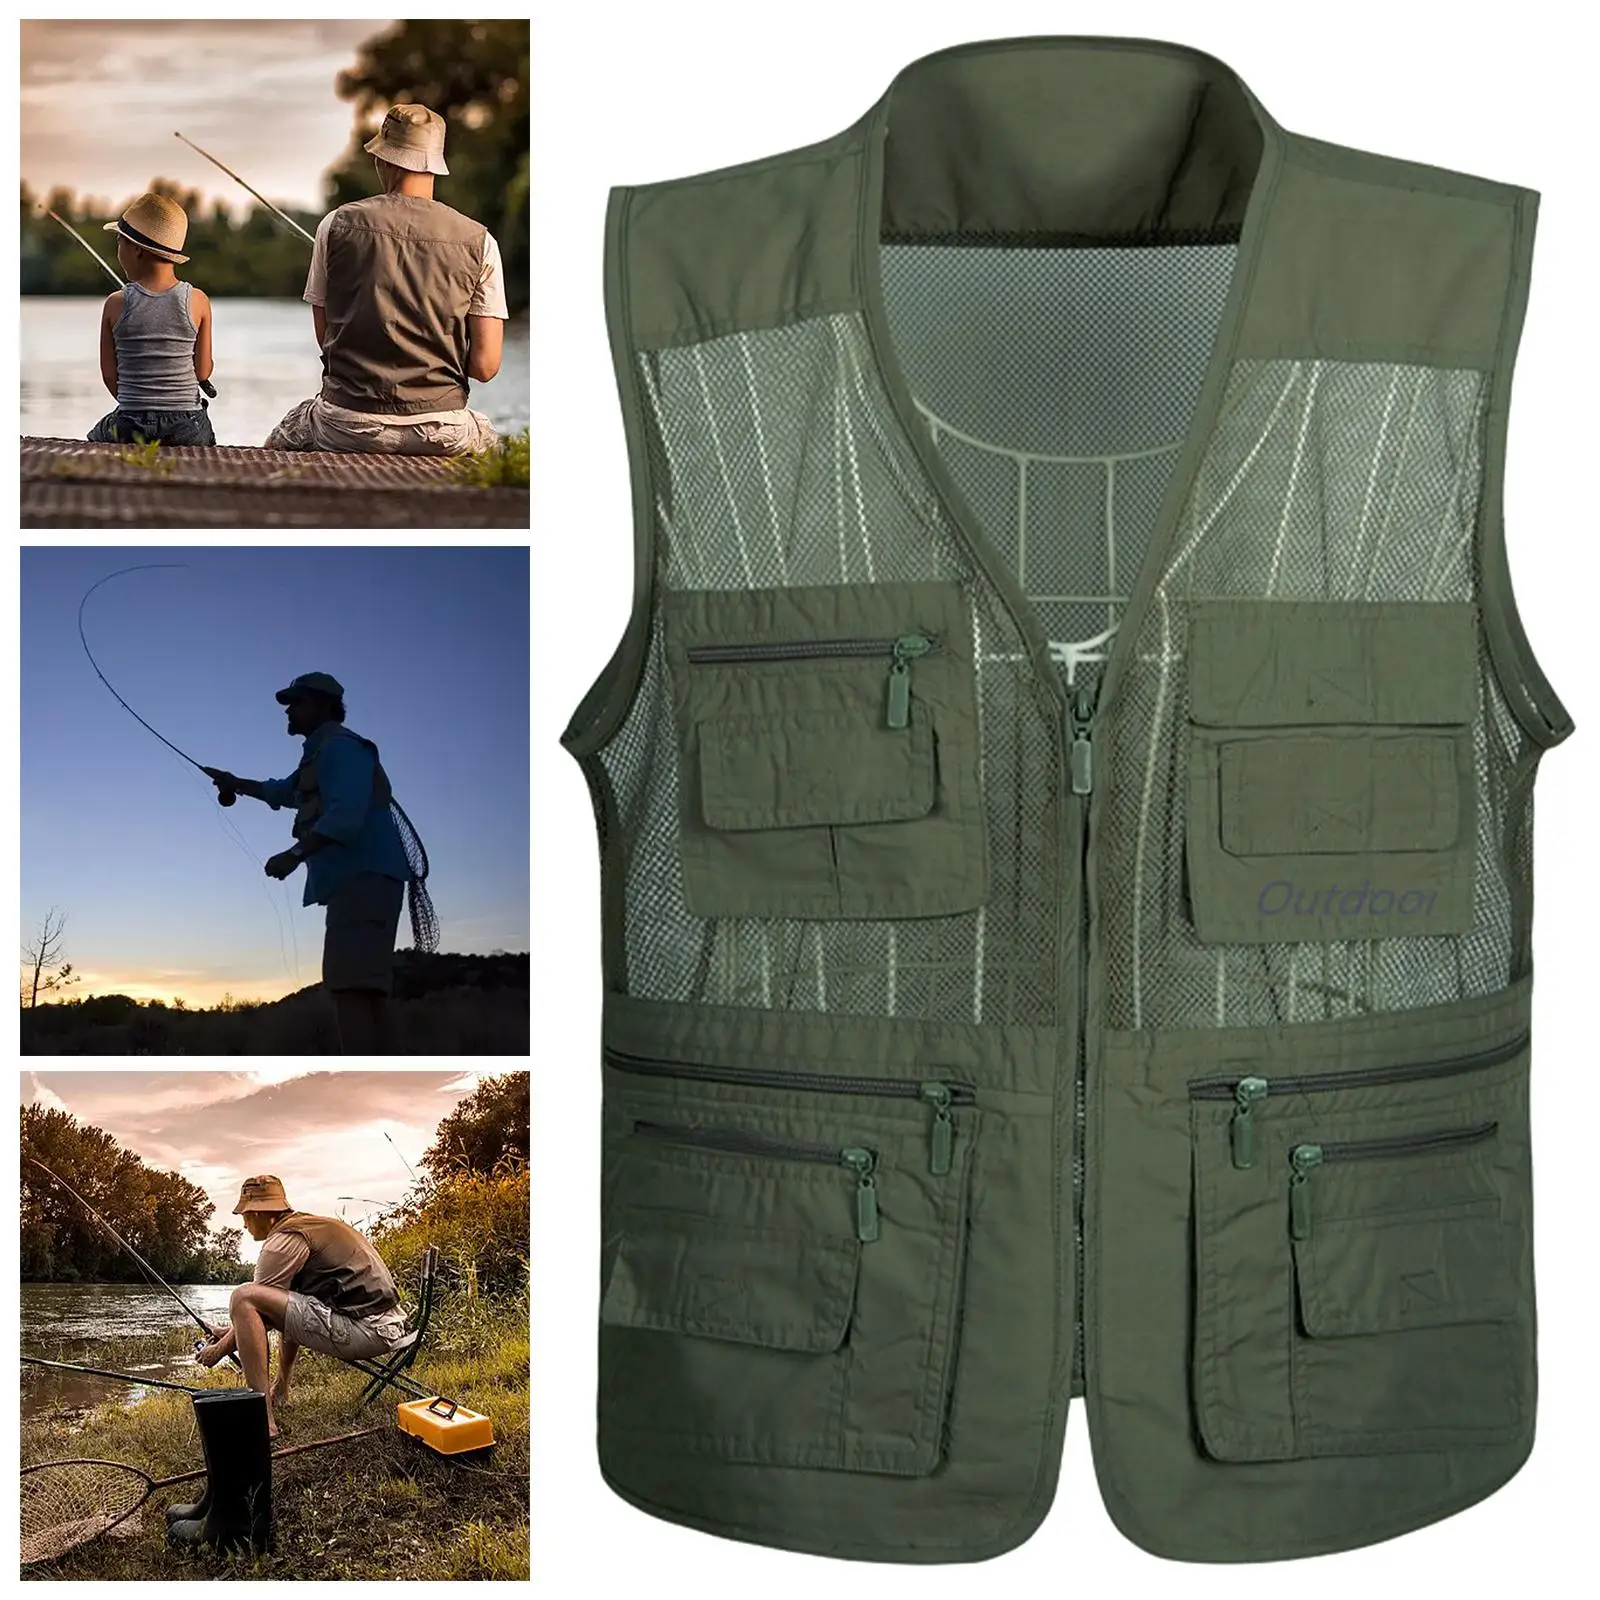 Outdoor Fishing Mesh Vest Breathable Quick Dry Fishing Jacket Photography Vests for Travel Outdoor Activities Youth Women Adults